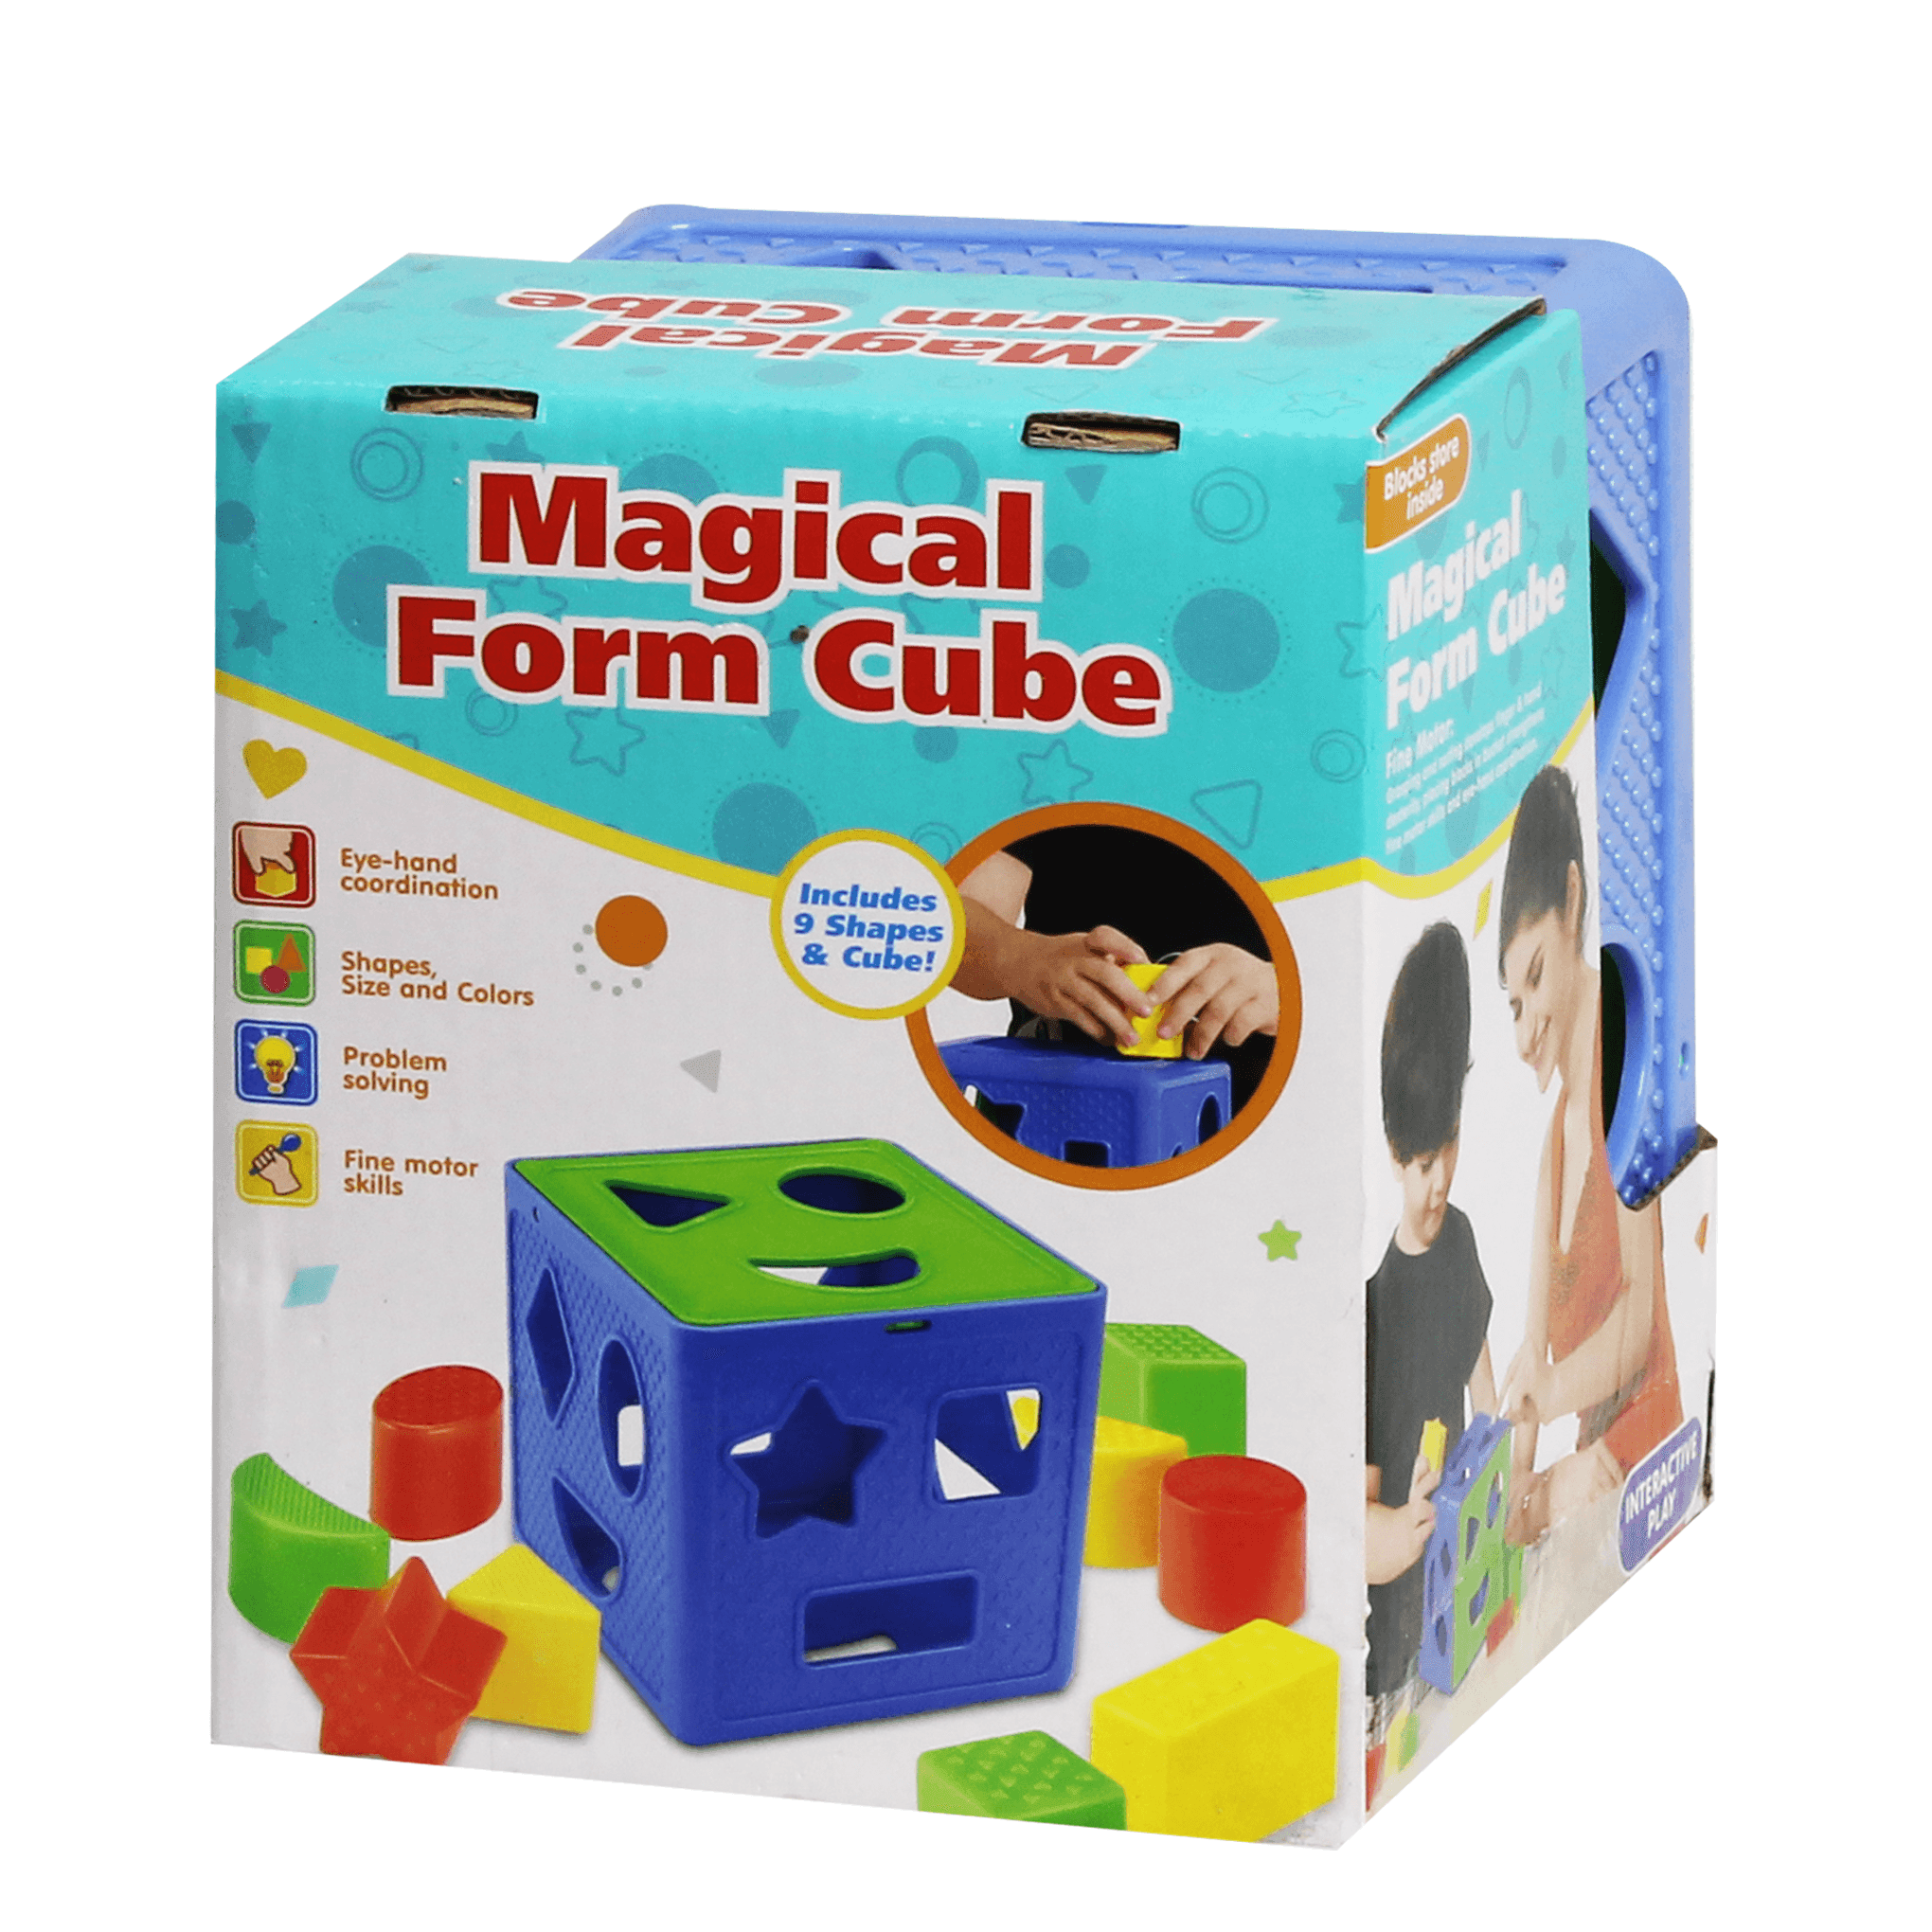 Magical Form Cube Board Matching Cubes Building Blocks Toy 9 Shapes and Cube - BumbleToys - 0-24 Months, 2-4 Years, Babies, Baby Saftey & Health, Boys, Educational book, Girls